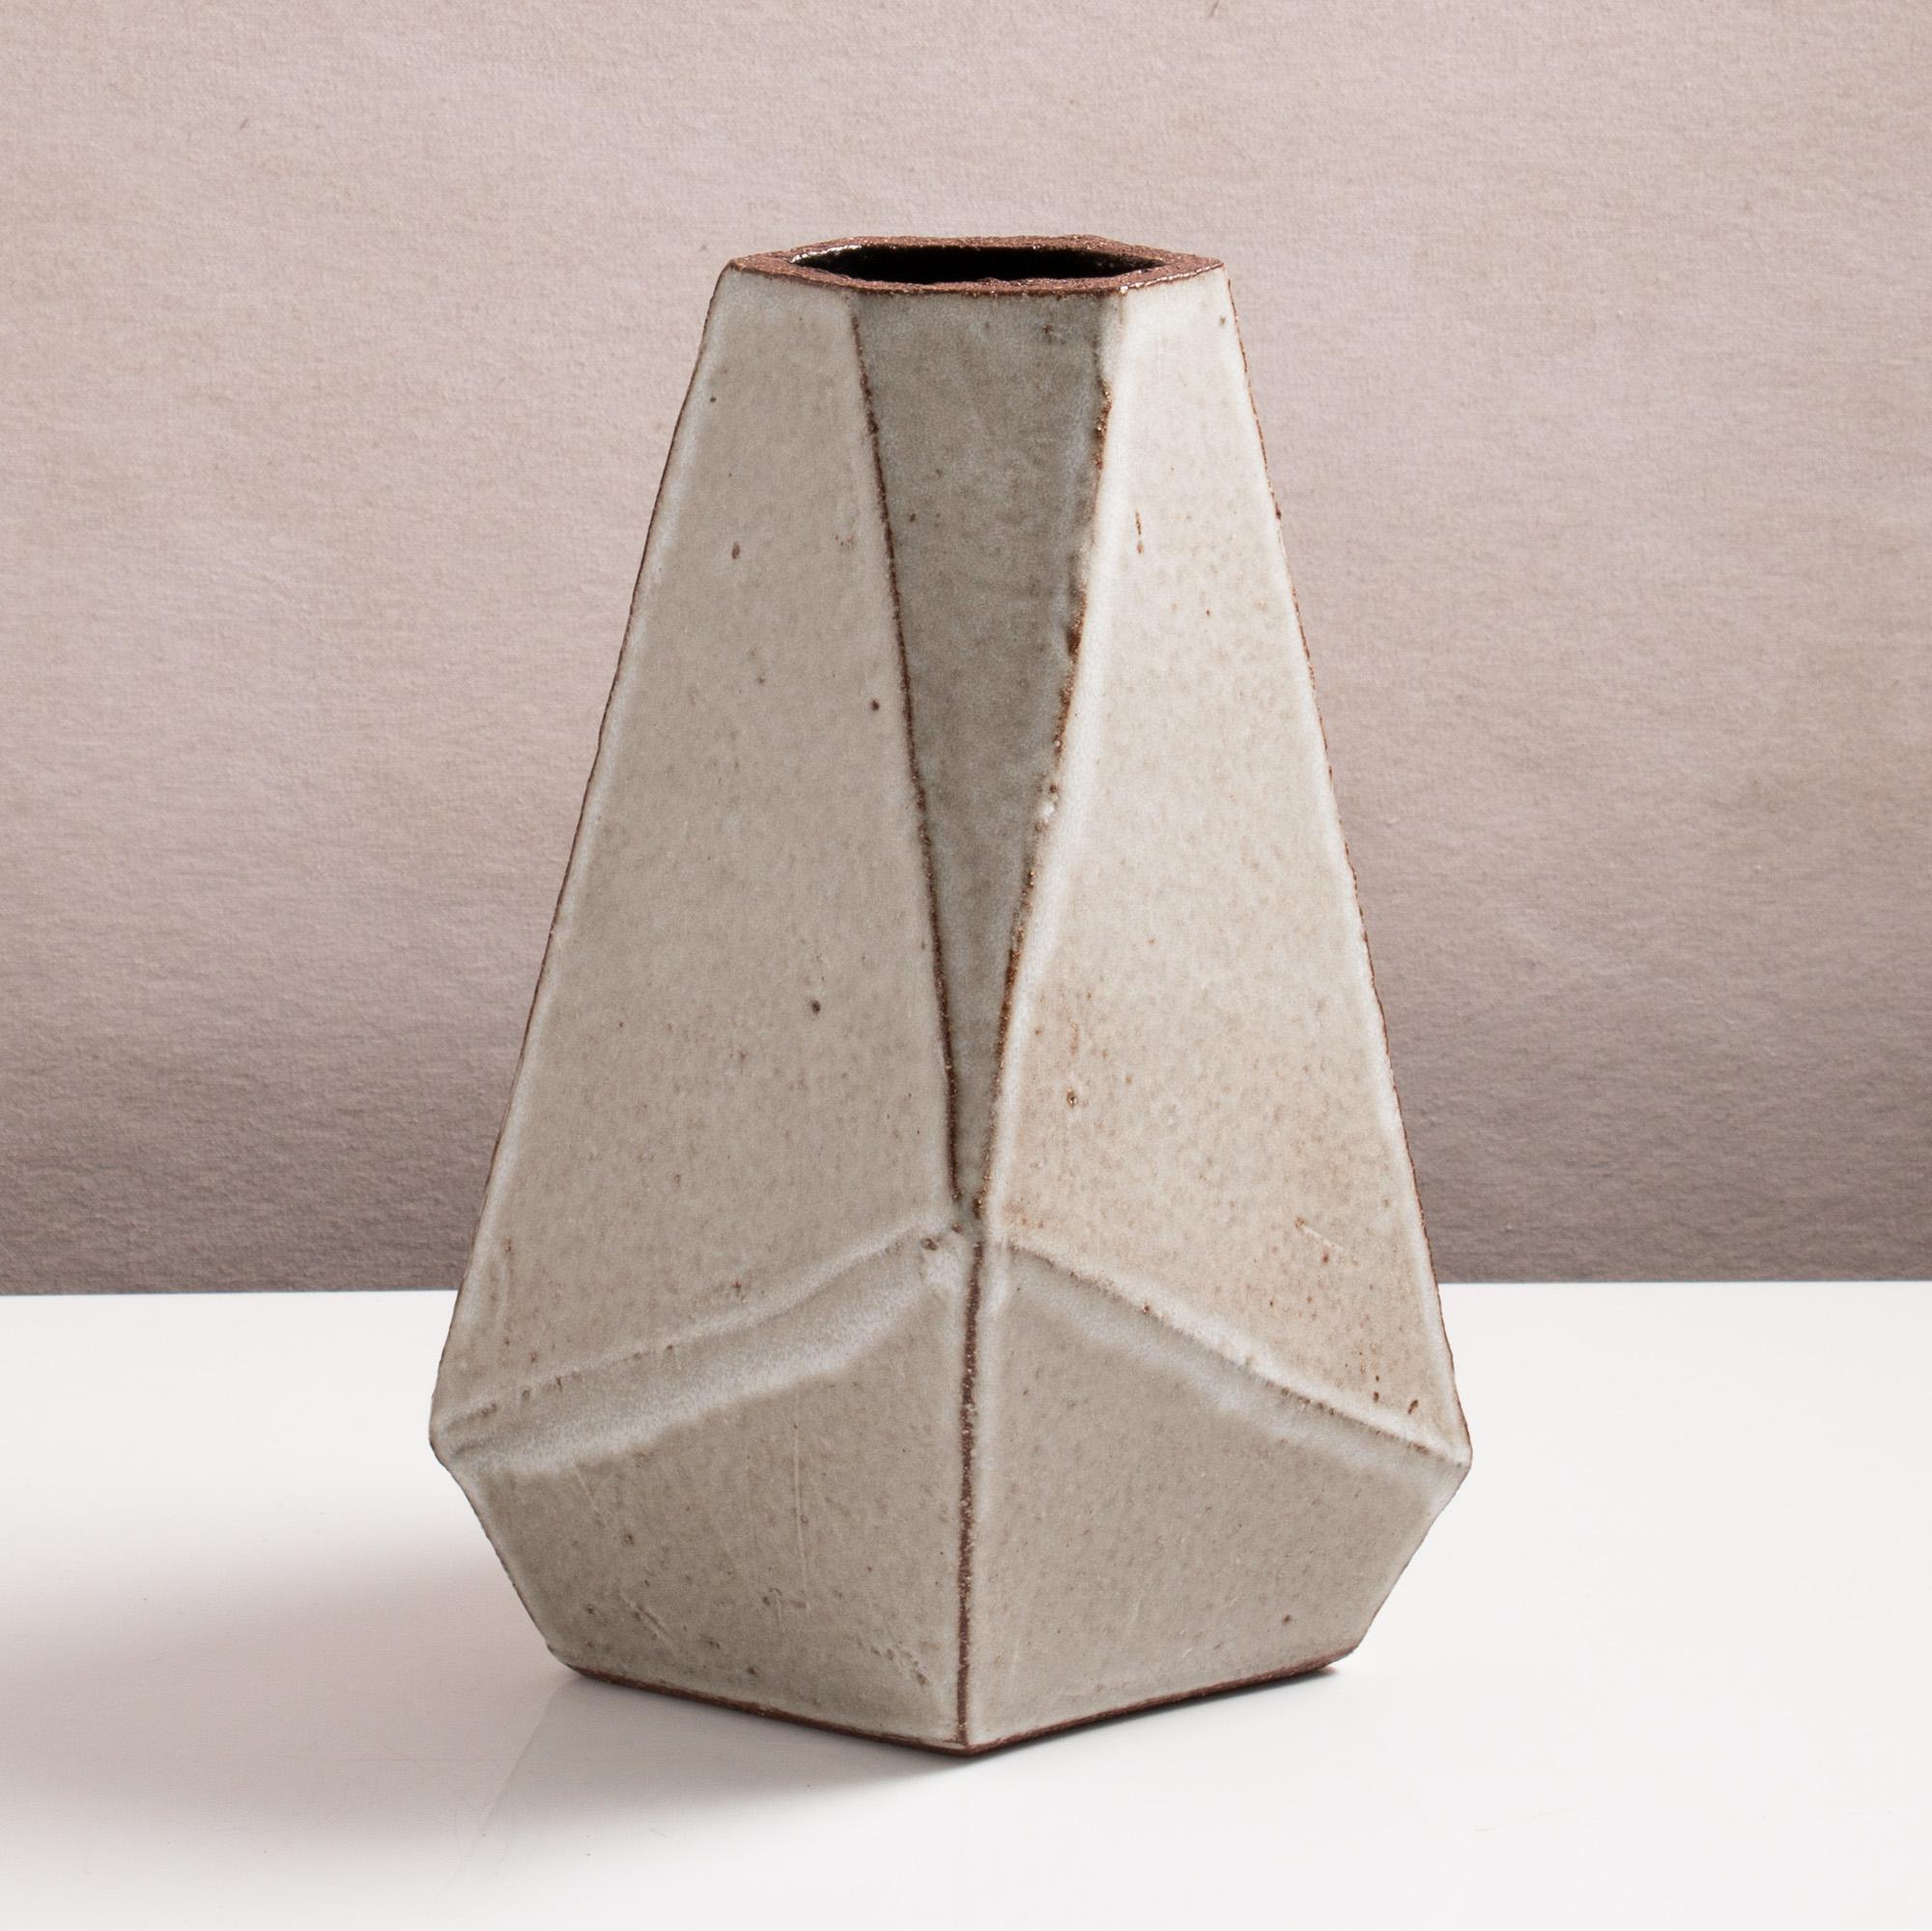 Inspired by midcentury Brutalist architecture, this tapered ceramic vase combines clean geometric lines with the warmth and individuality inherent in handmade work. The complex geometric shape narrows to slender opening for flowers or small